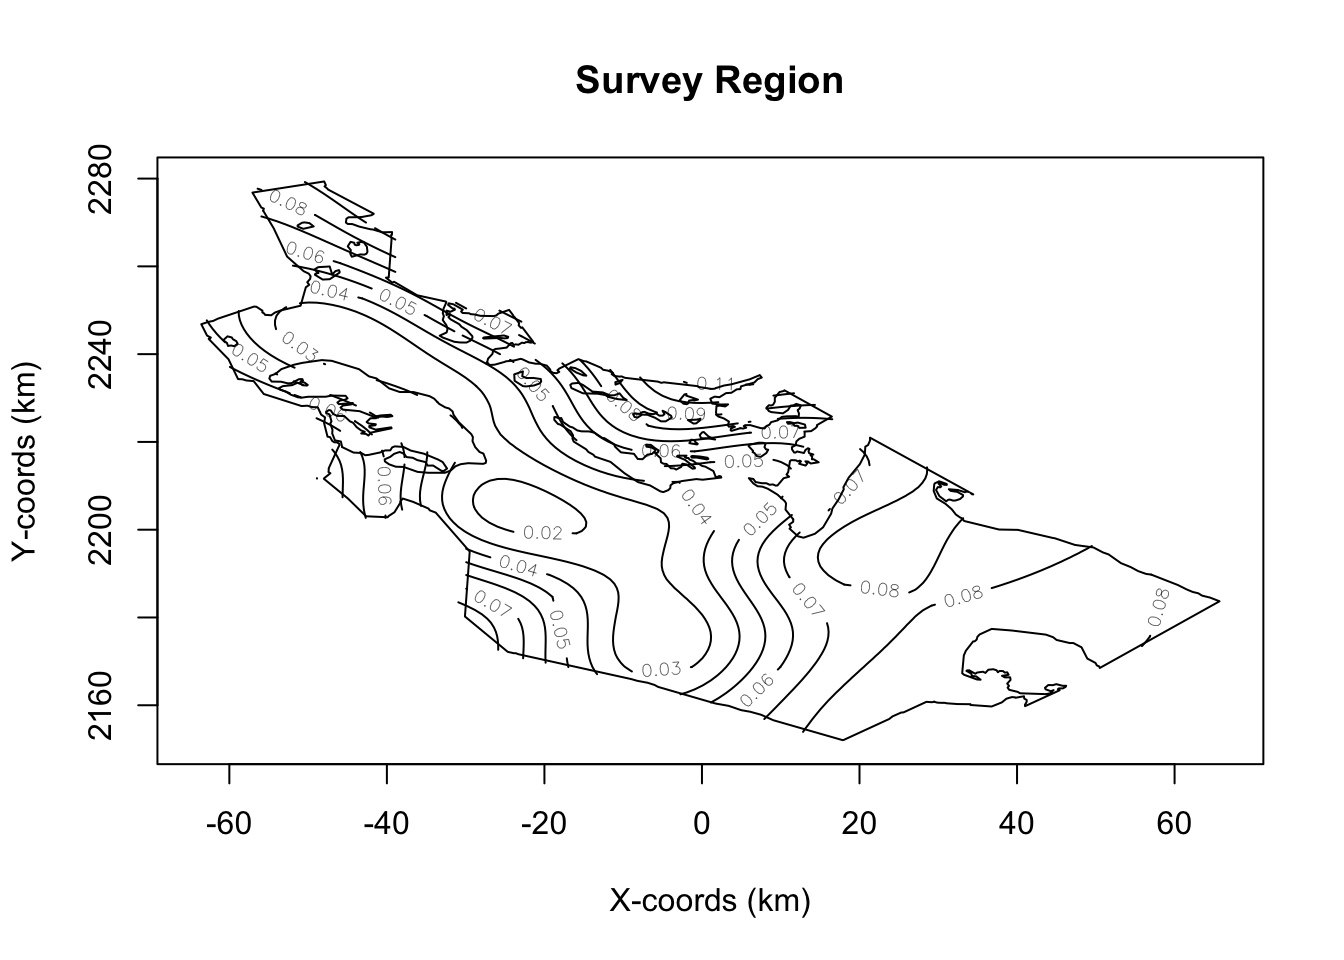 Study region with animal density superimposed
Note lower density near the trail system